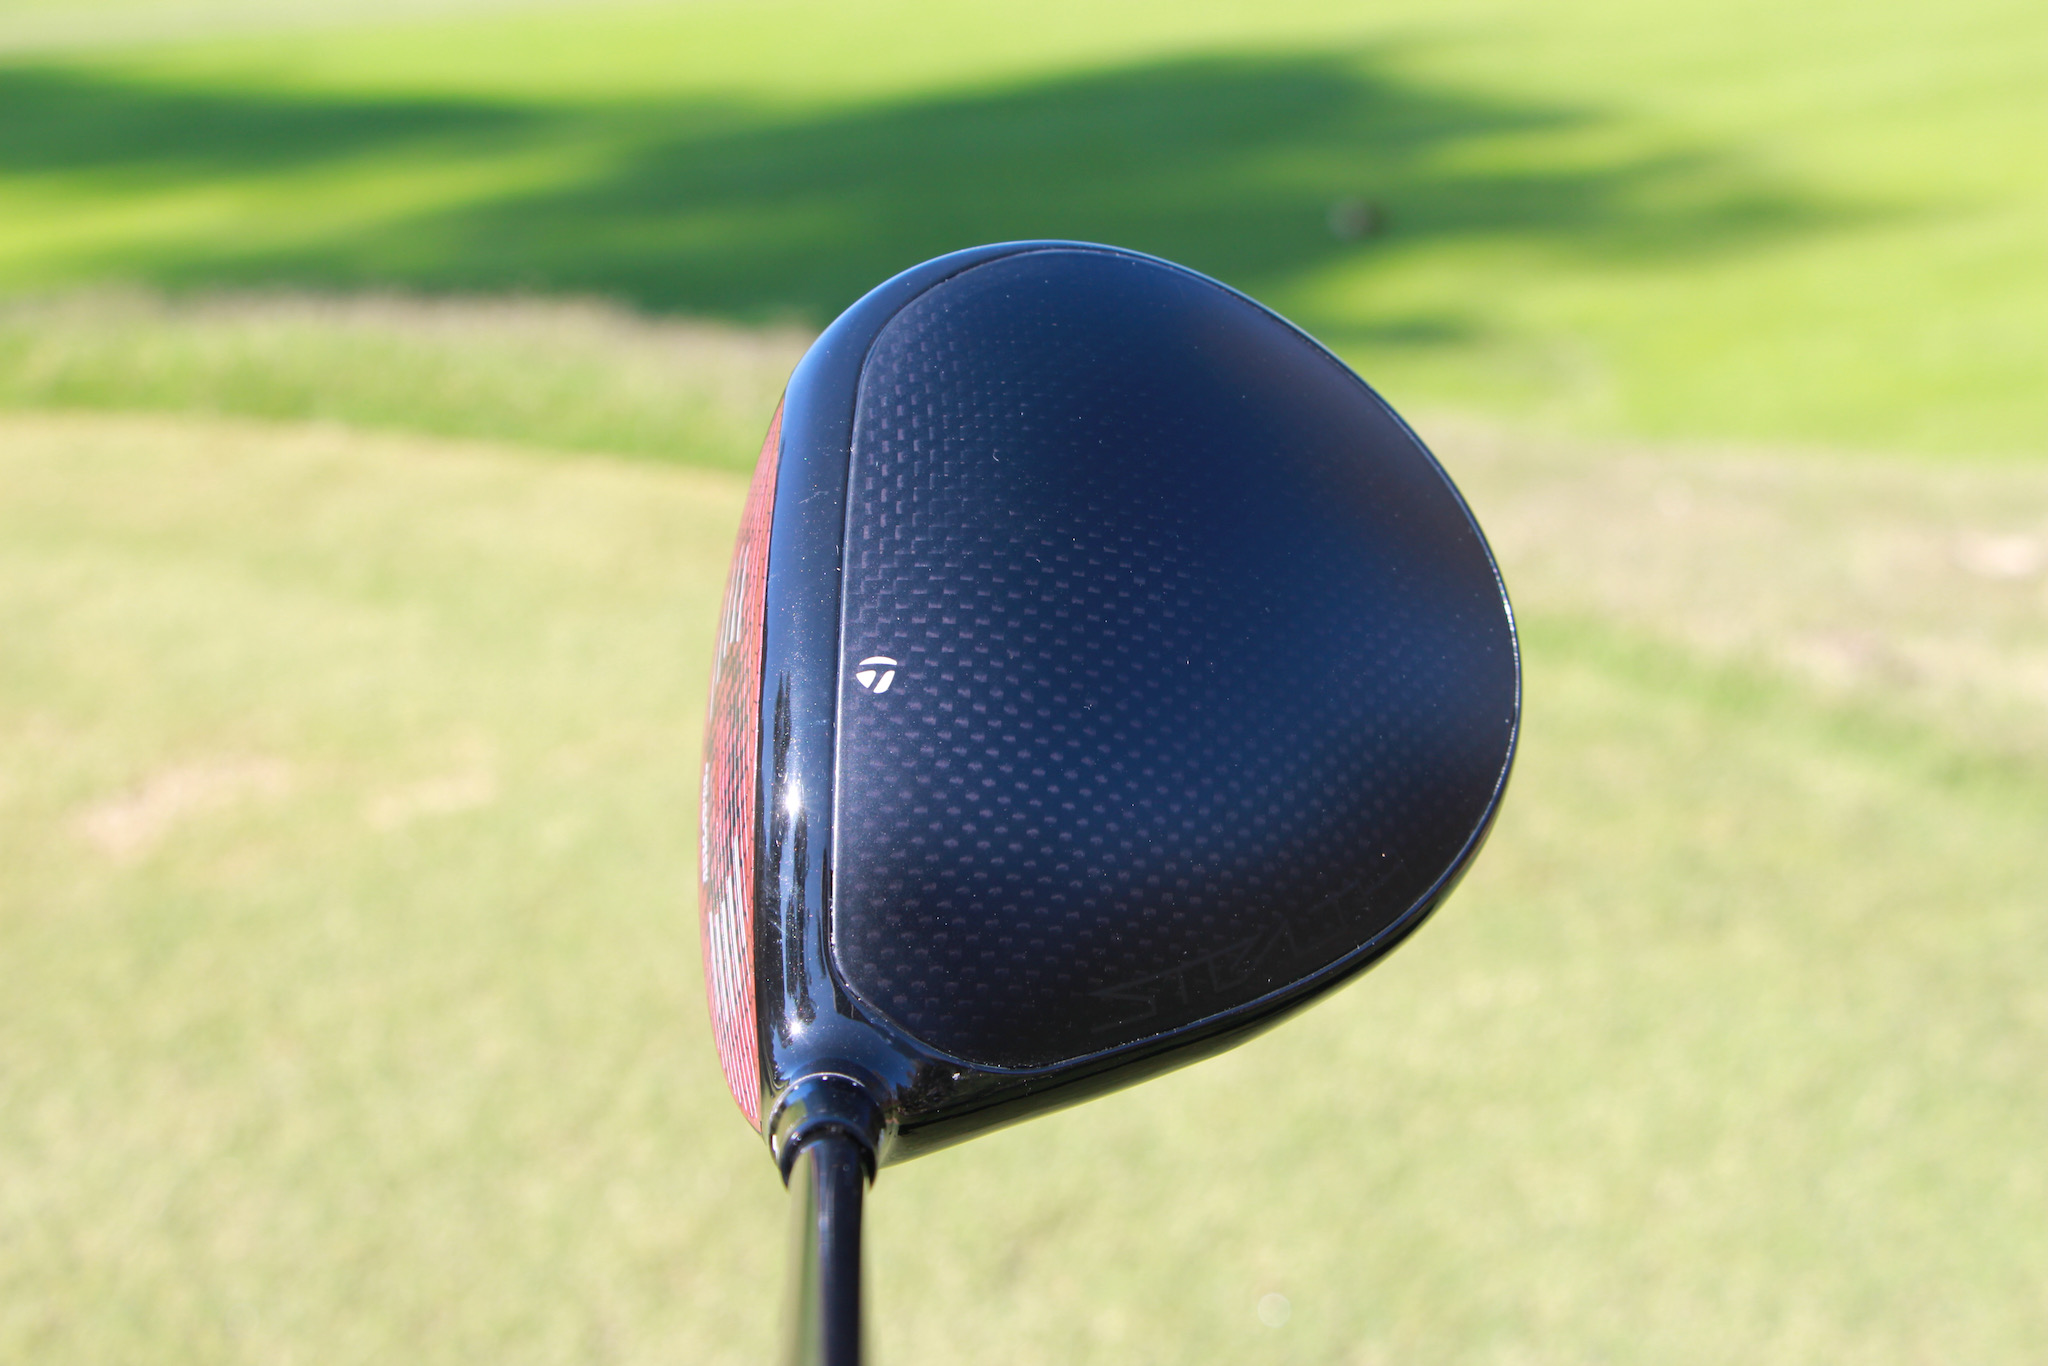 TaylorMade Stealth driver: Crown